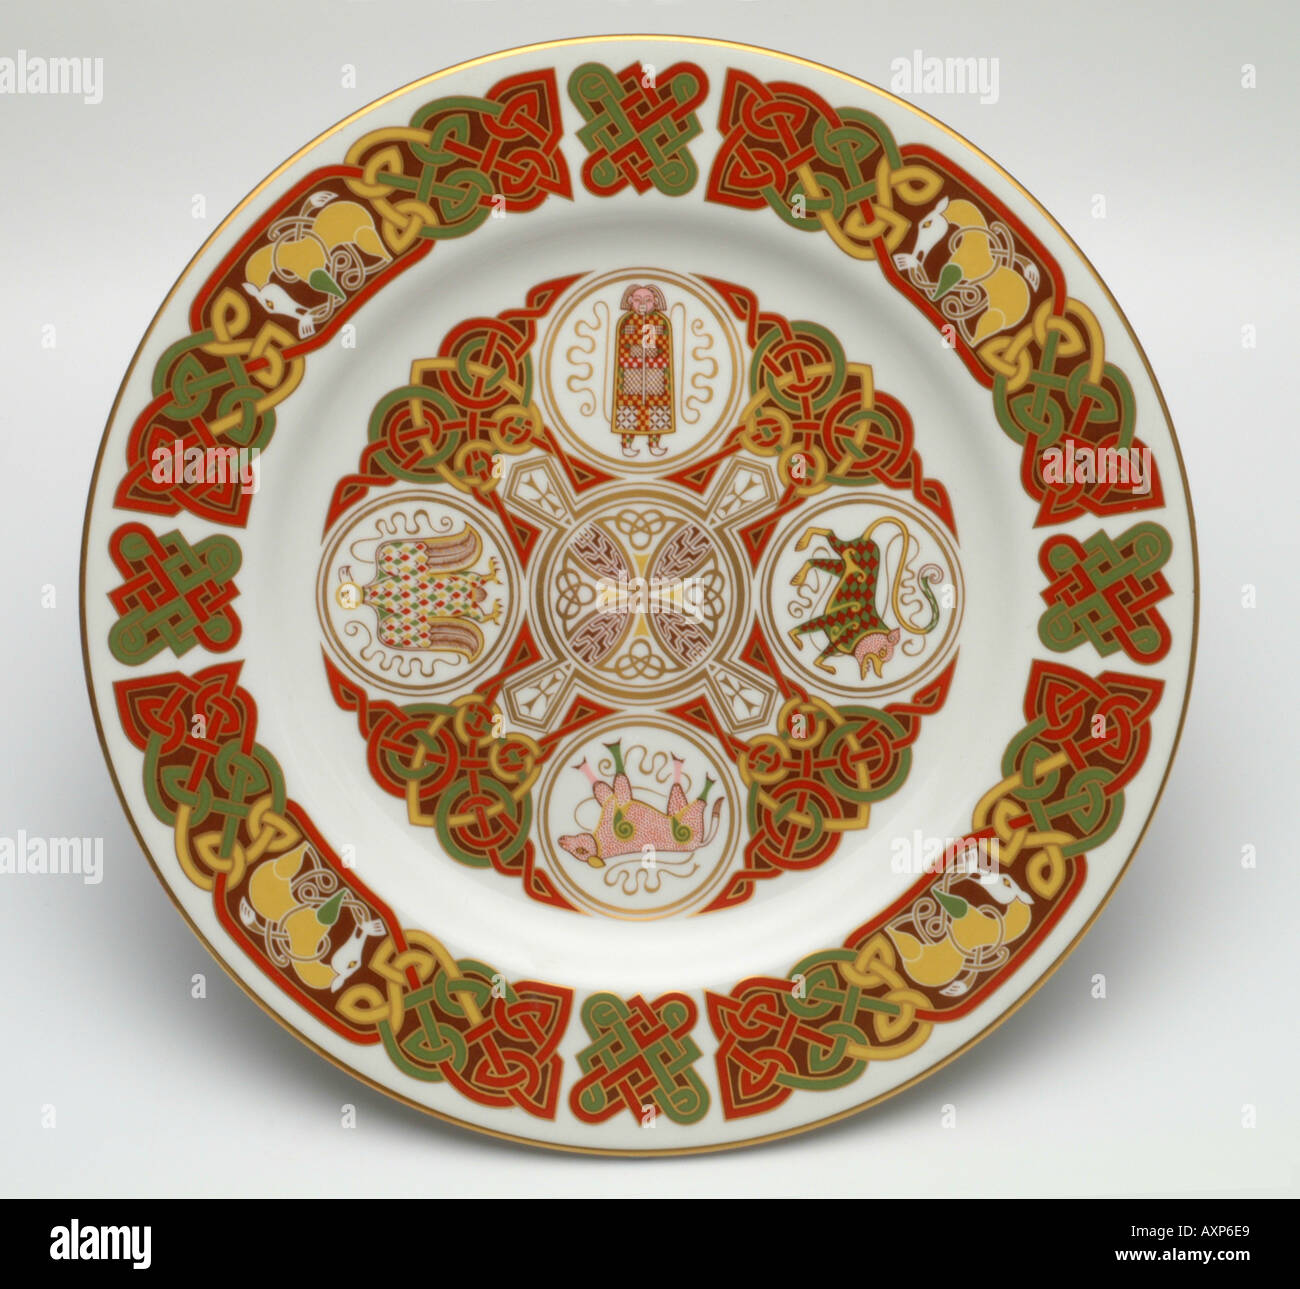 durrow Spode china plates with Celtic designs inspired by the Christian Gospels128 Stock Photo